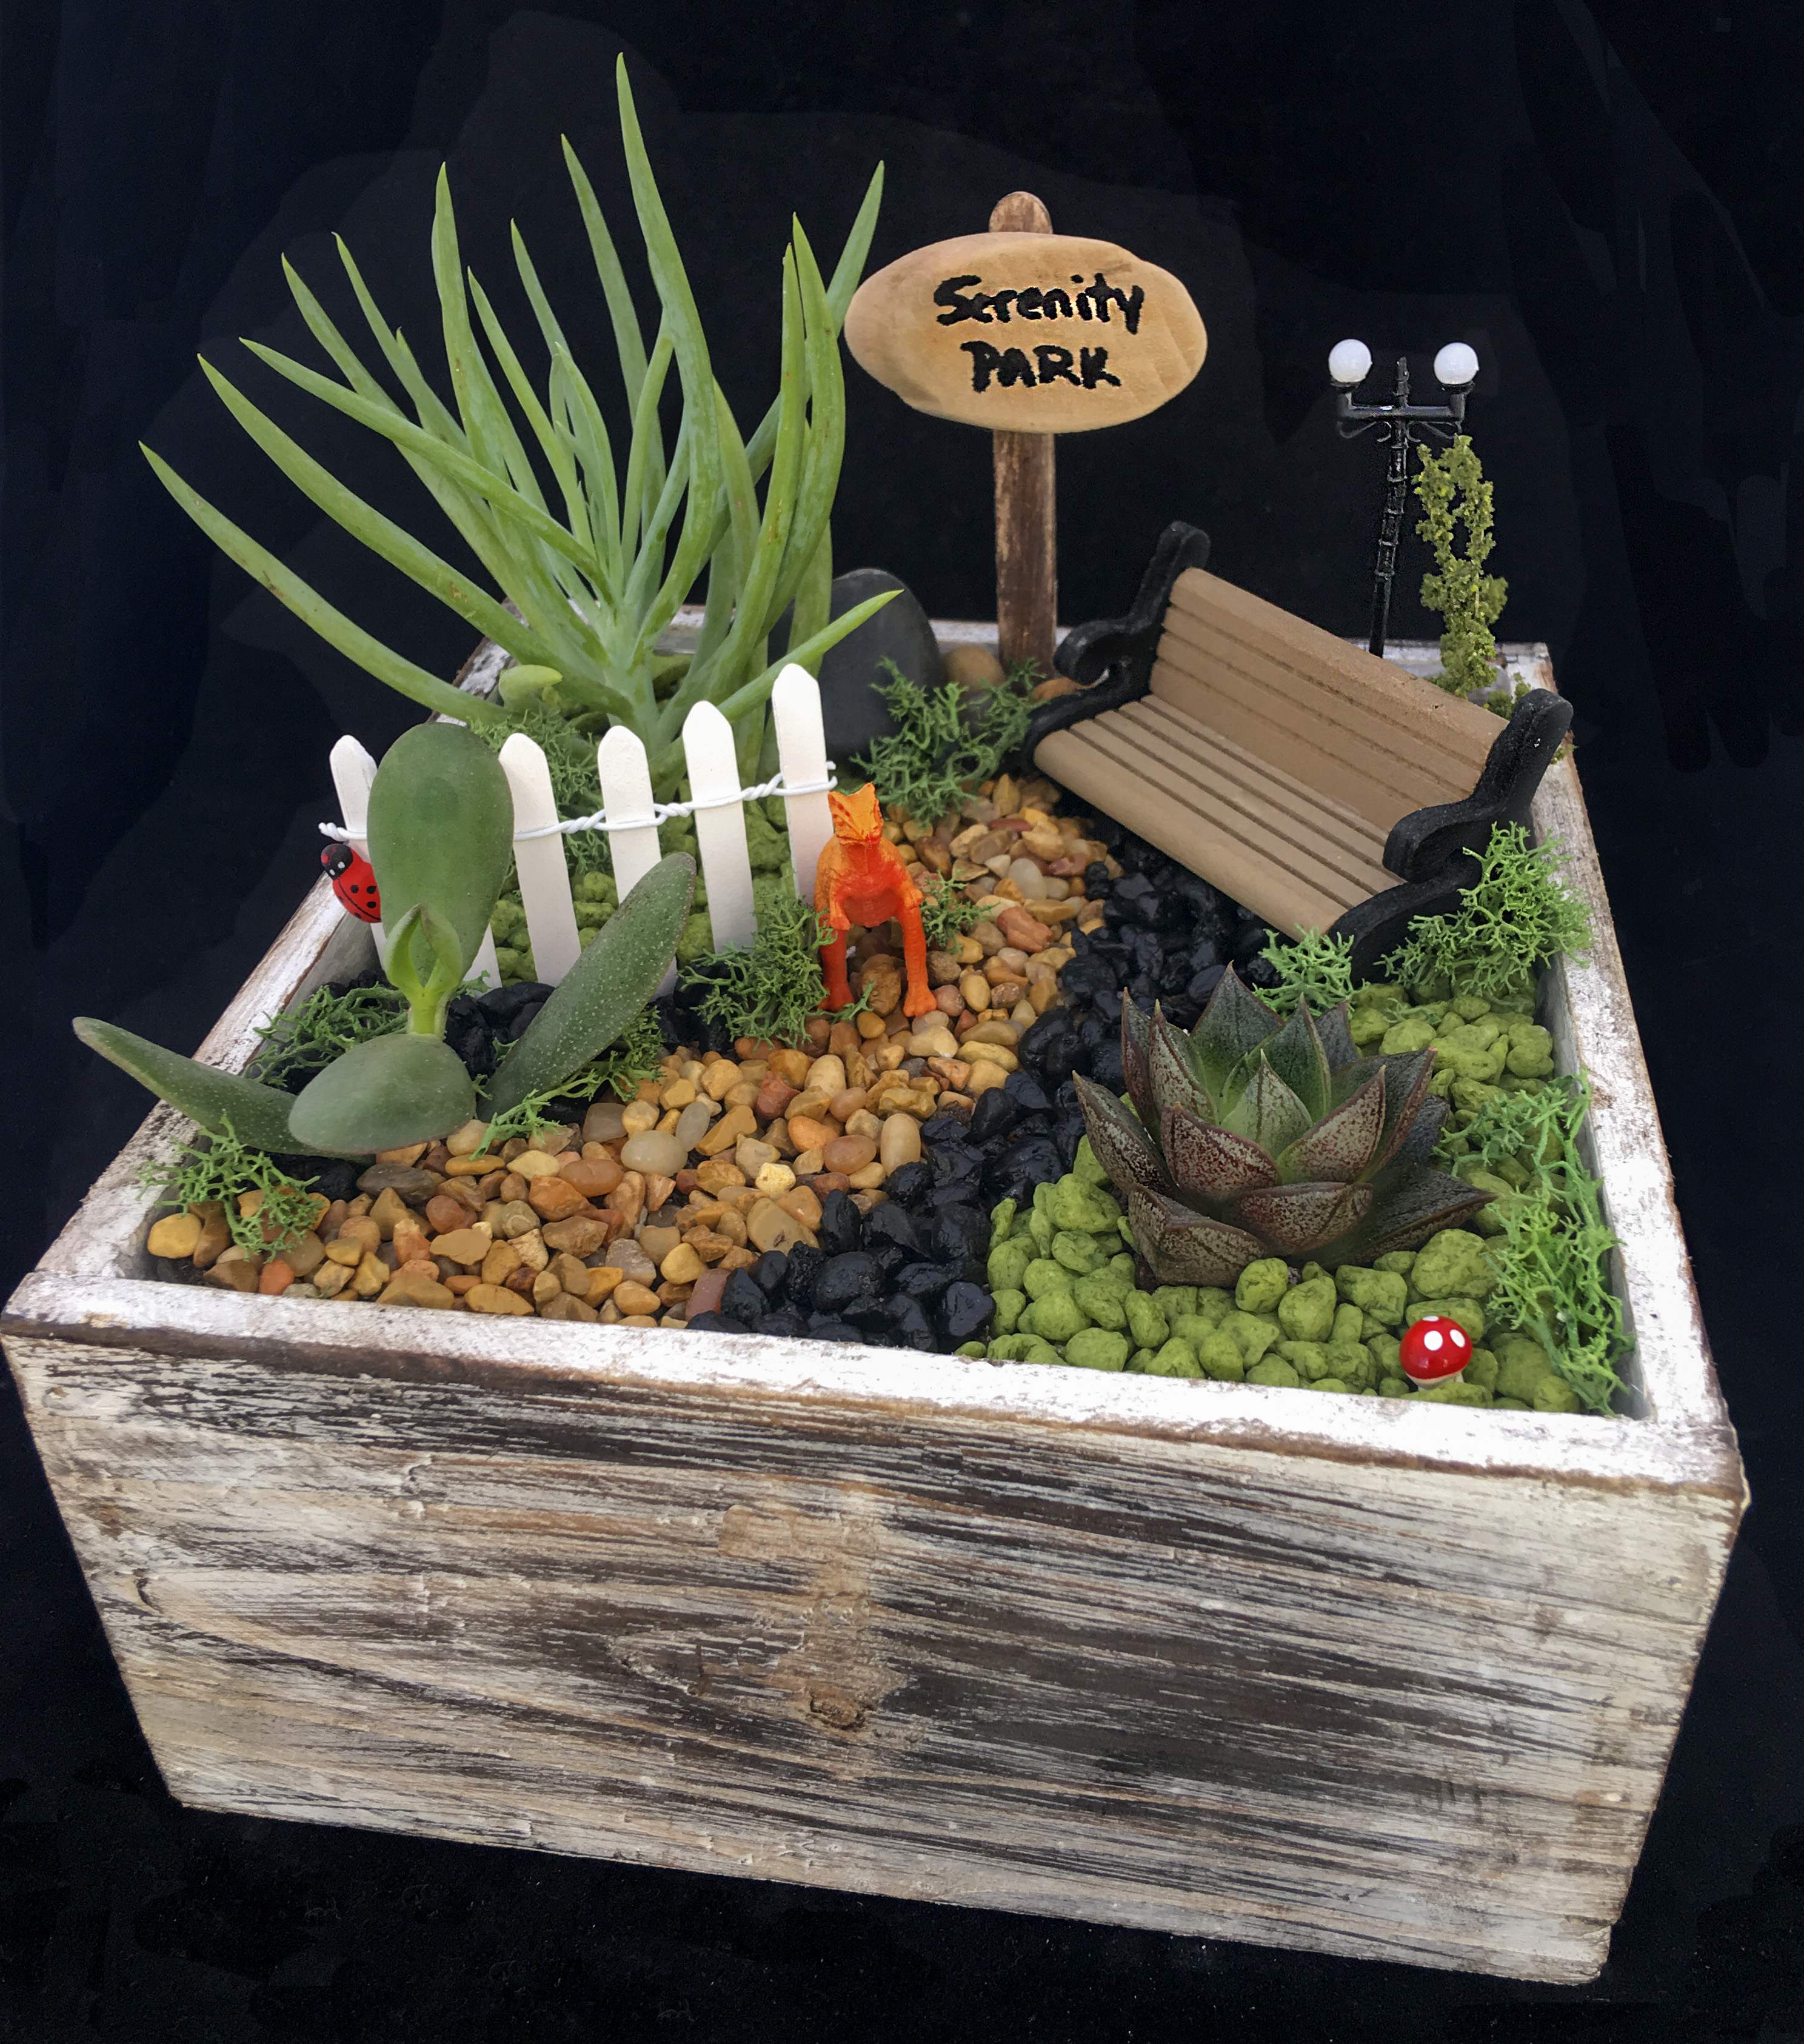 A Serenity Park plant nite project by Yaymaker